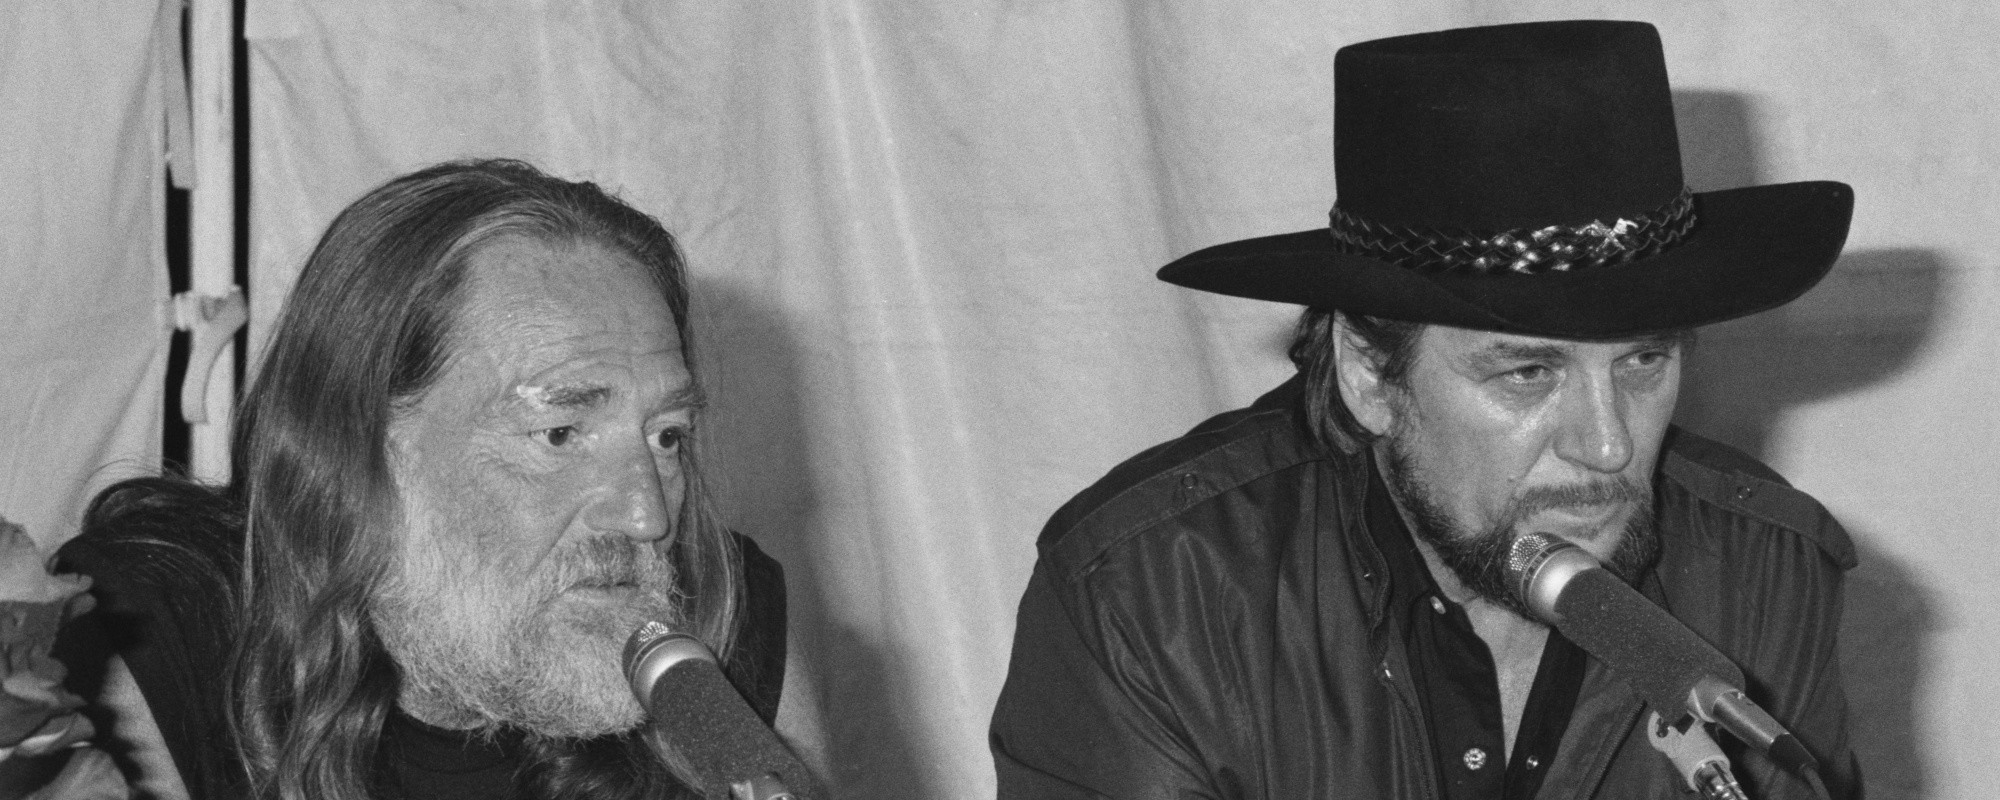 The Story Behind “Just to Satisfy You” by Waylon Jennings and Willie Nelson and How It Became a No. 1 Hit Almost 20 Years After It Was Written